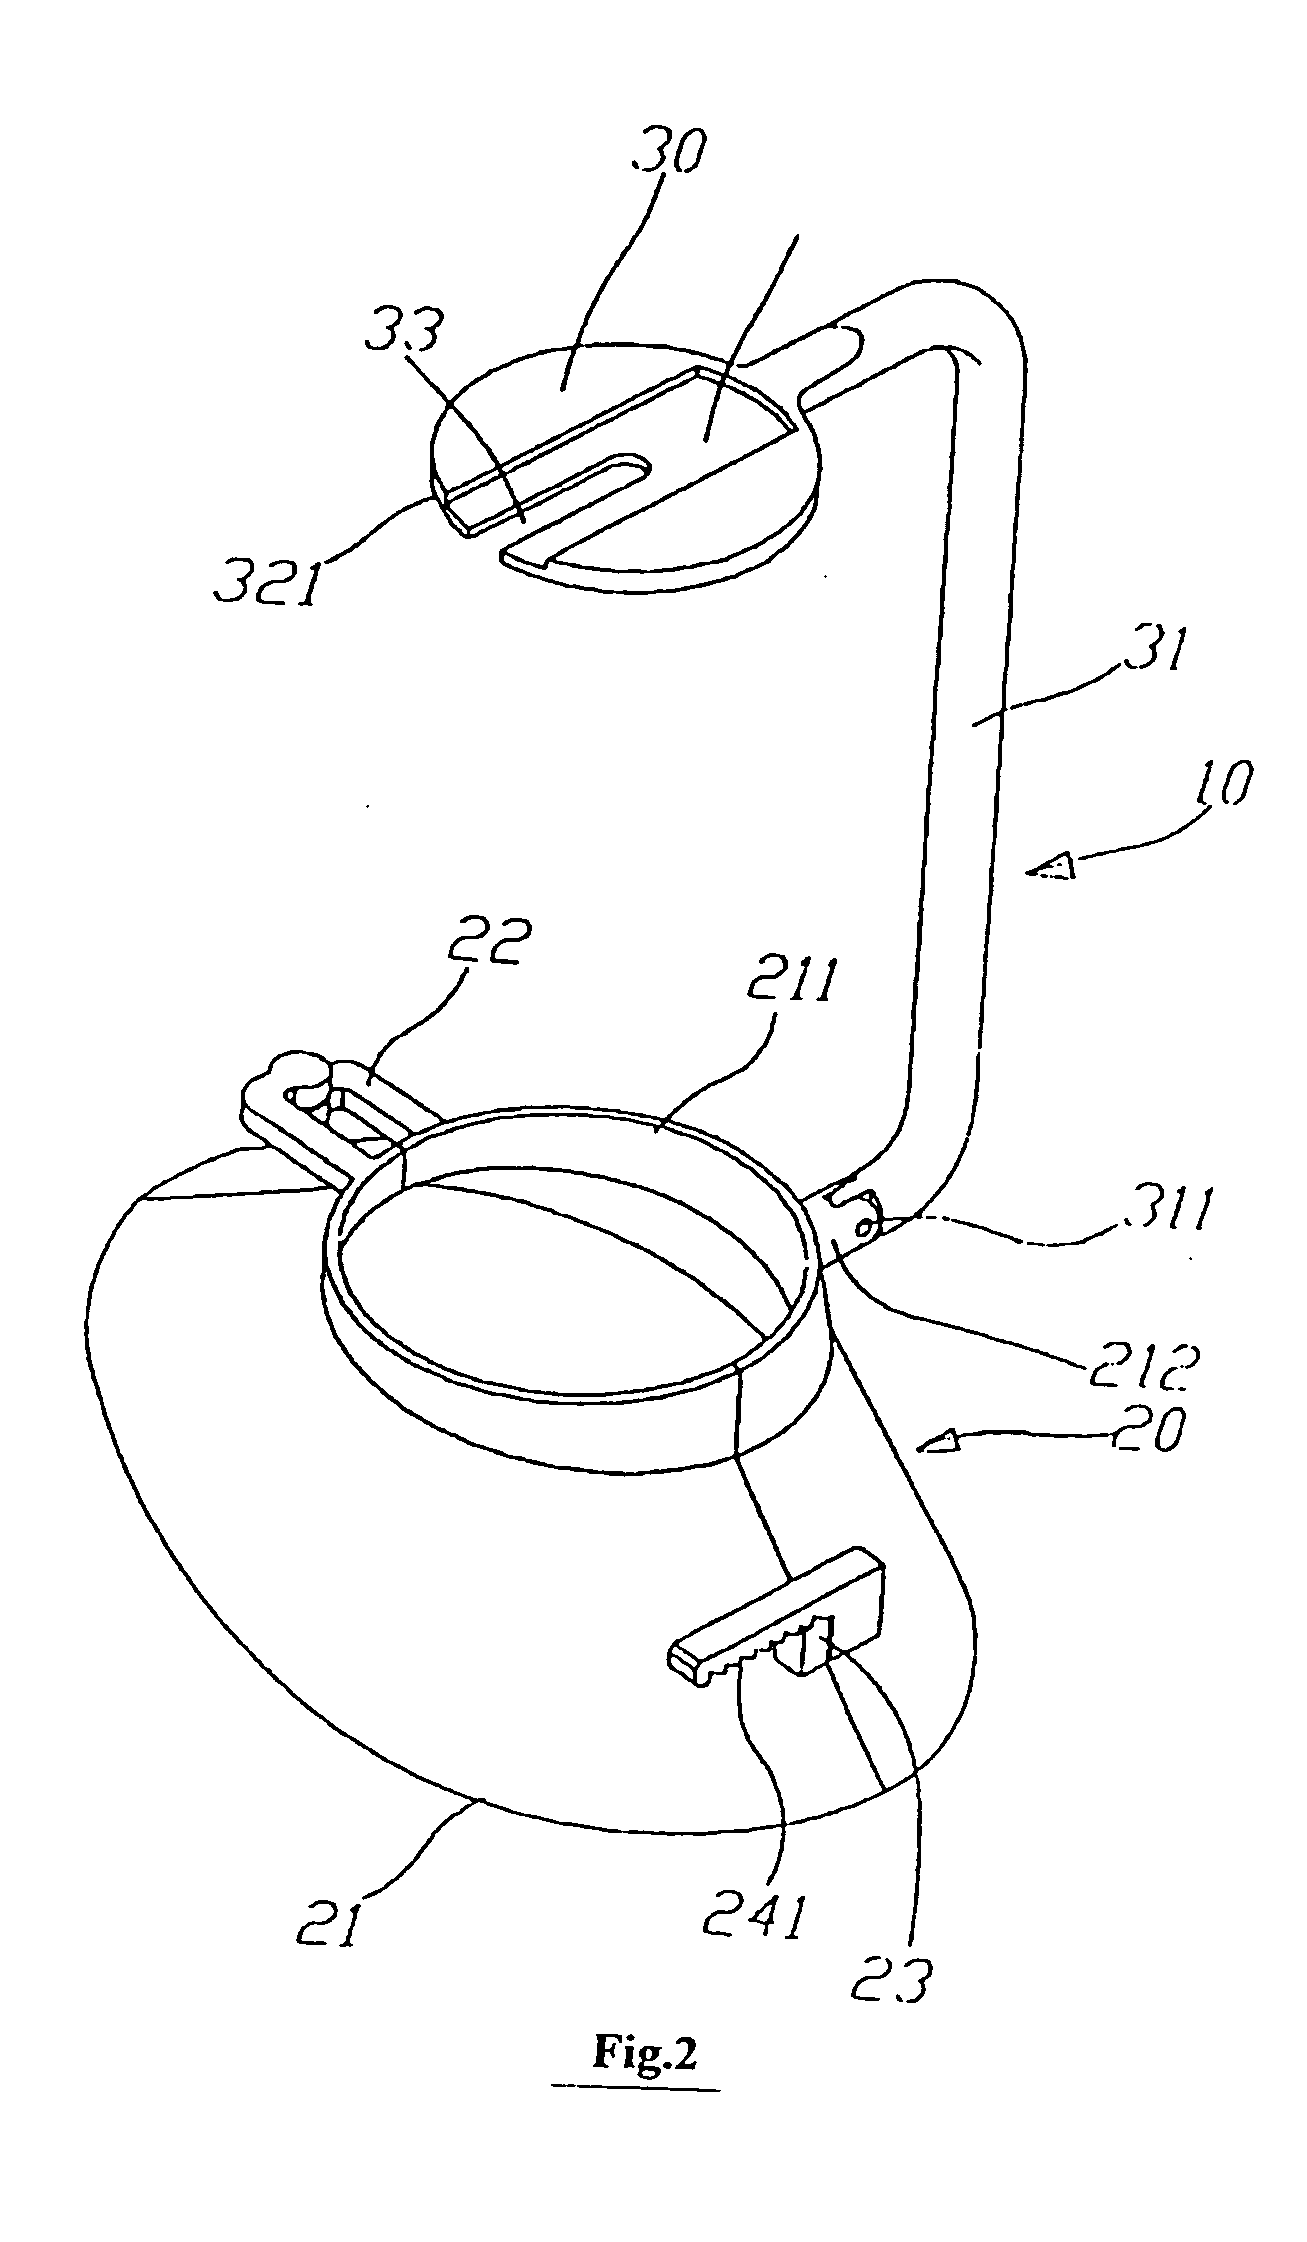 Apparatus for fitting the protecting femoral neck device